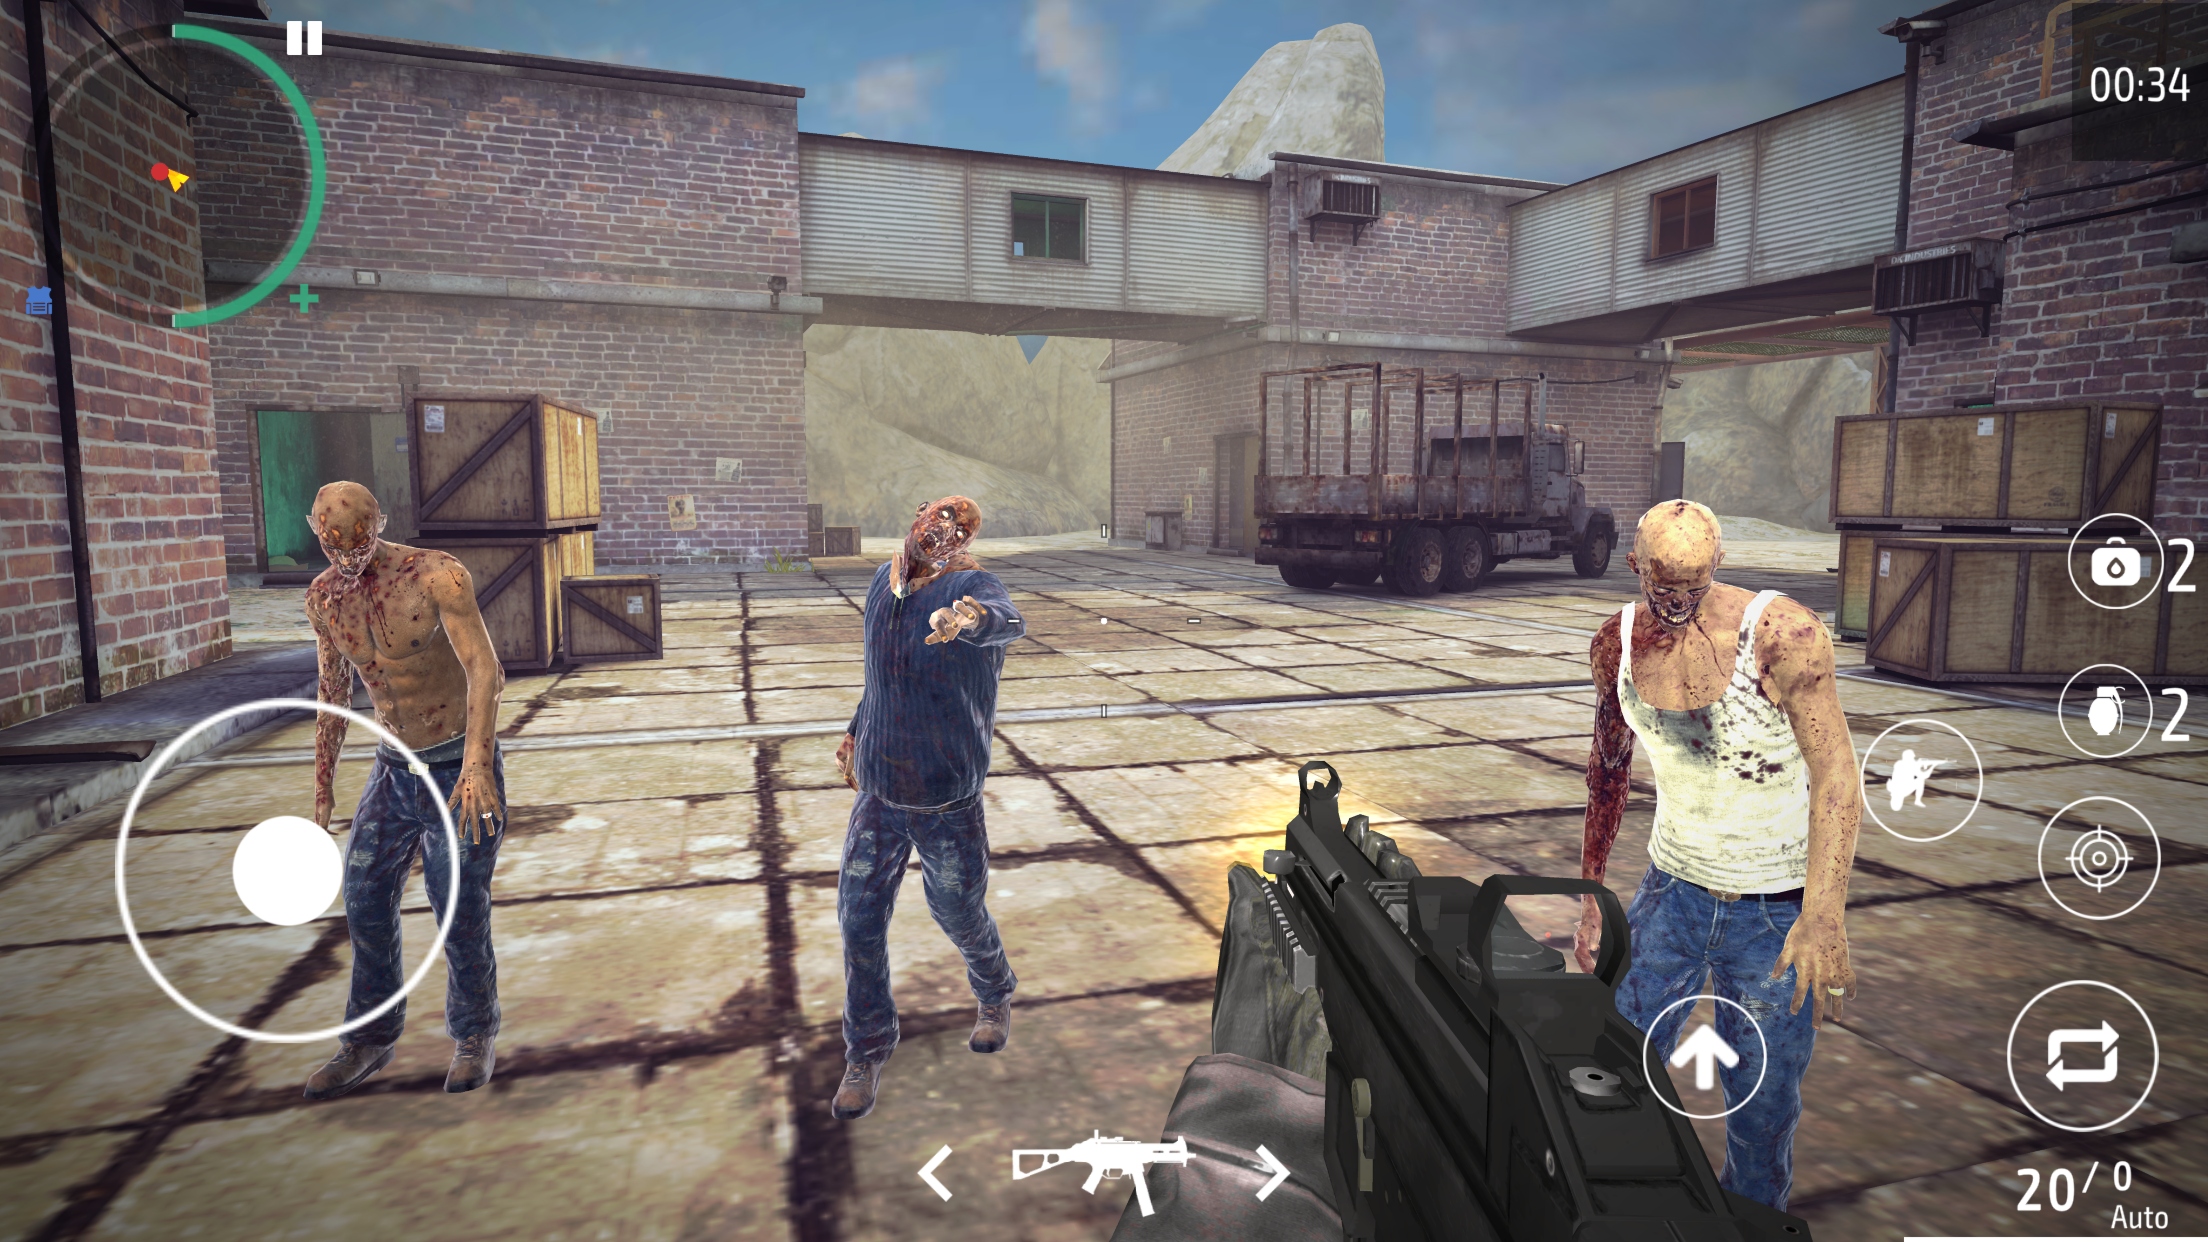 Play Zombie Shooter - fps games Online